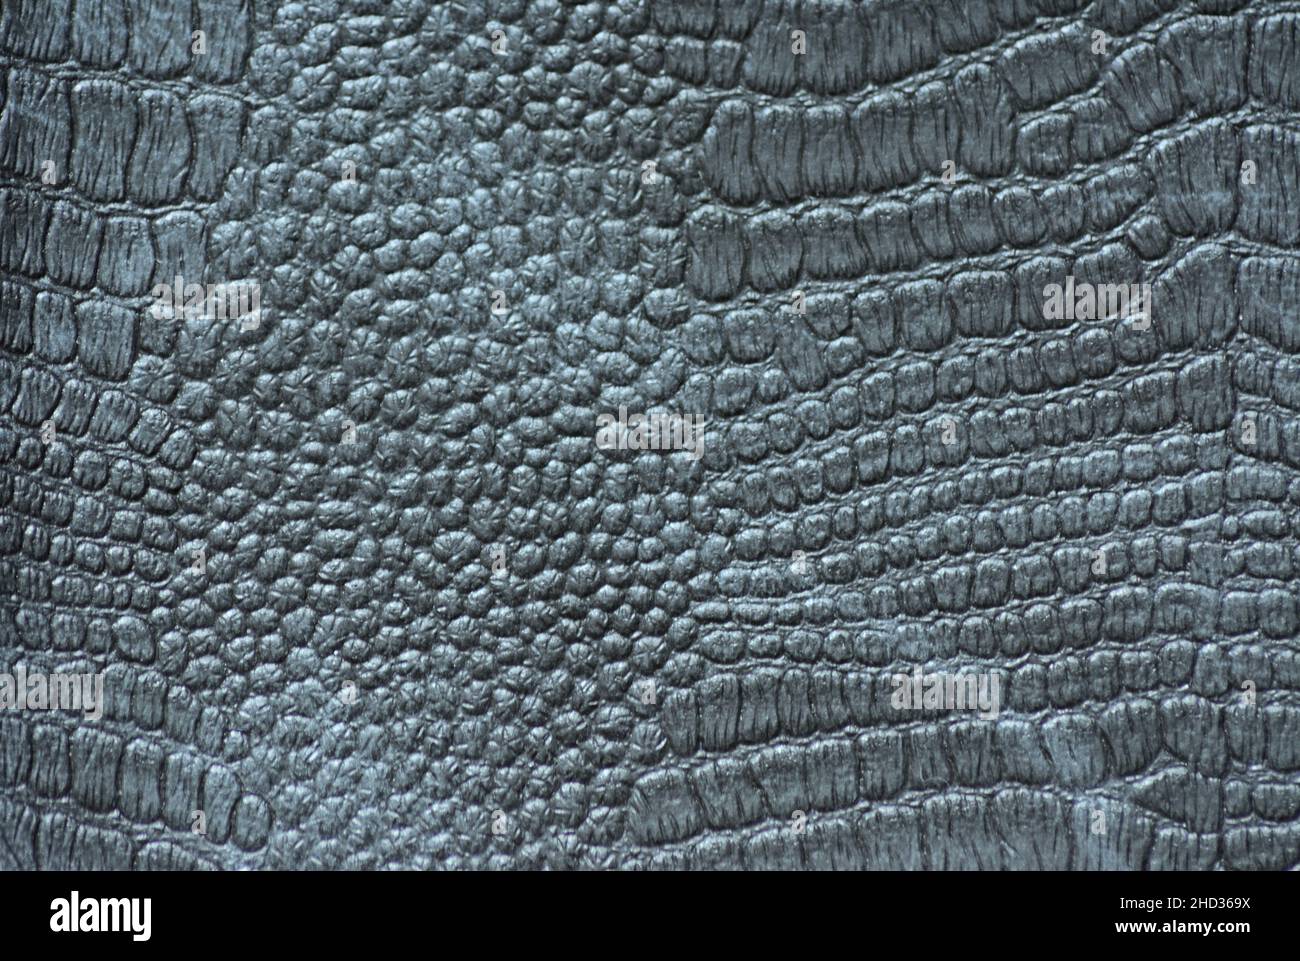 Fragment of genuine reptile skin artificially dyed shiny black. Background, pattern, texture. Stock Photo